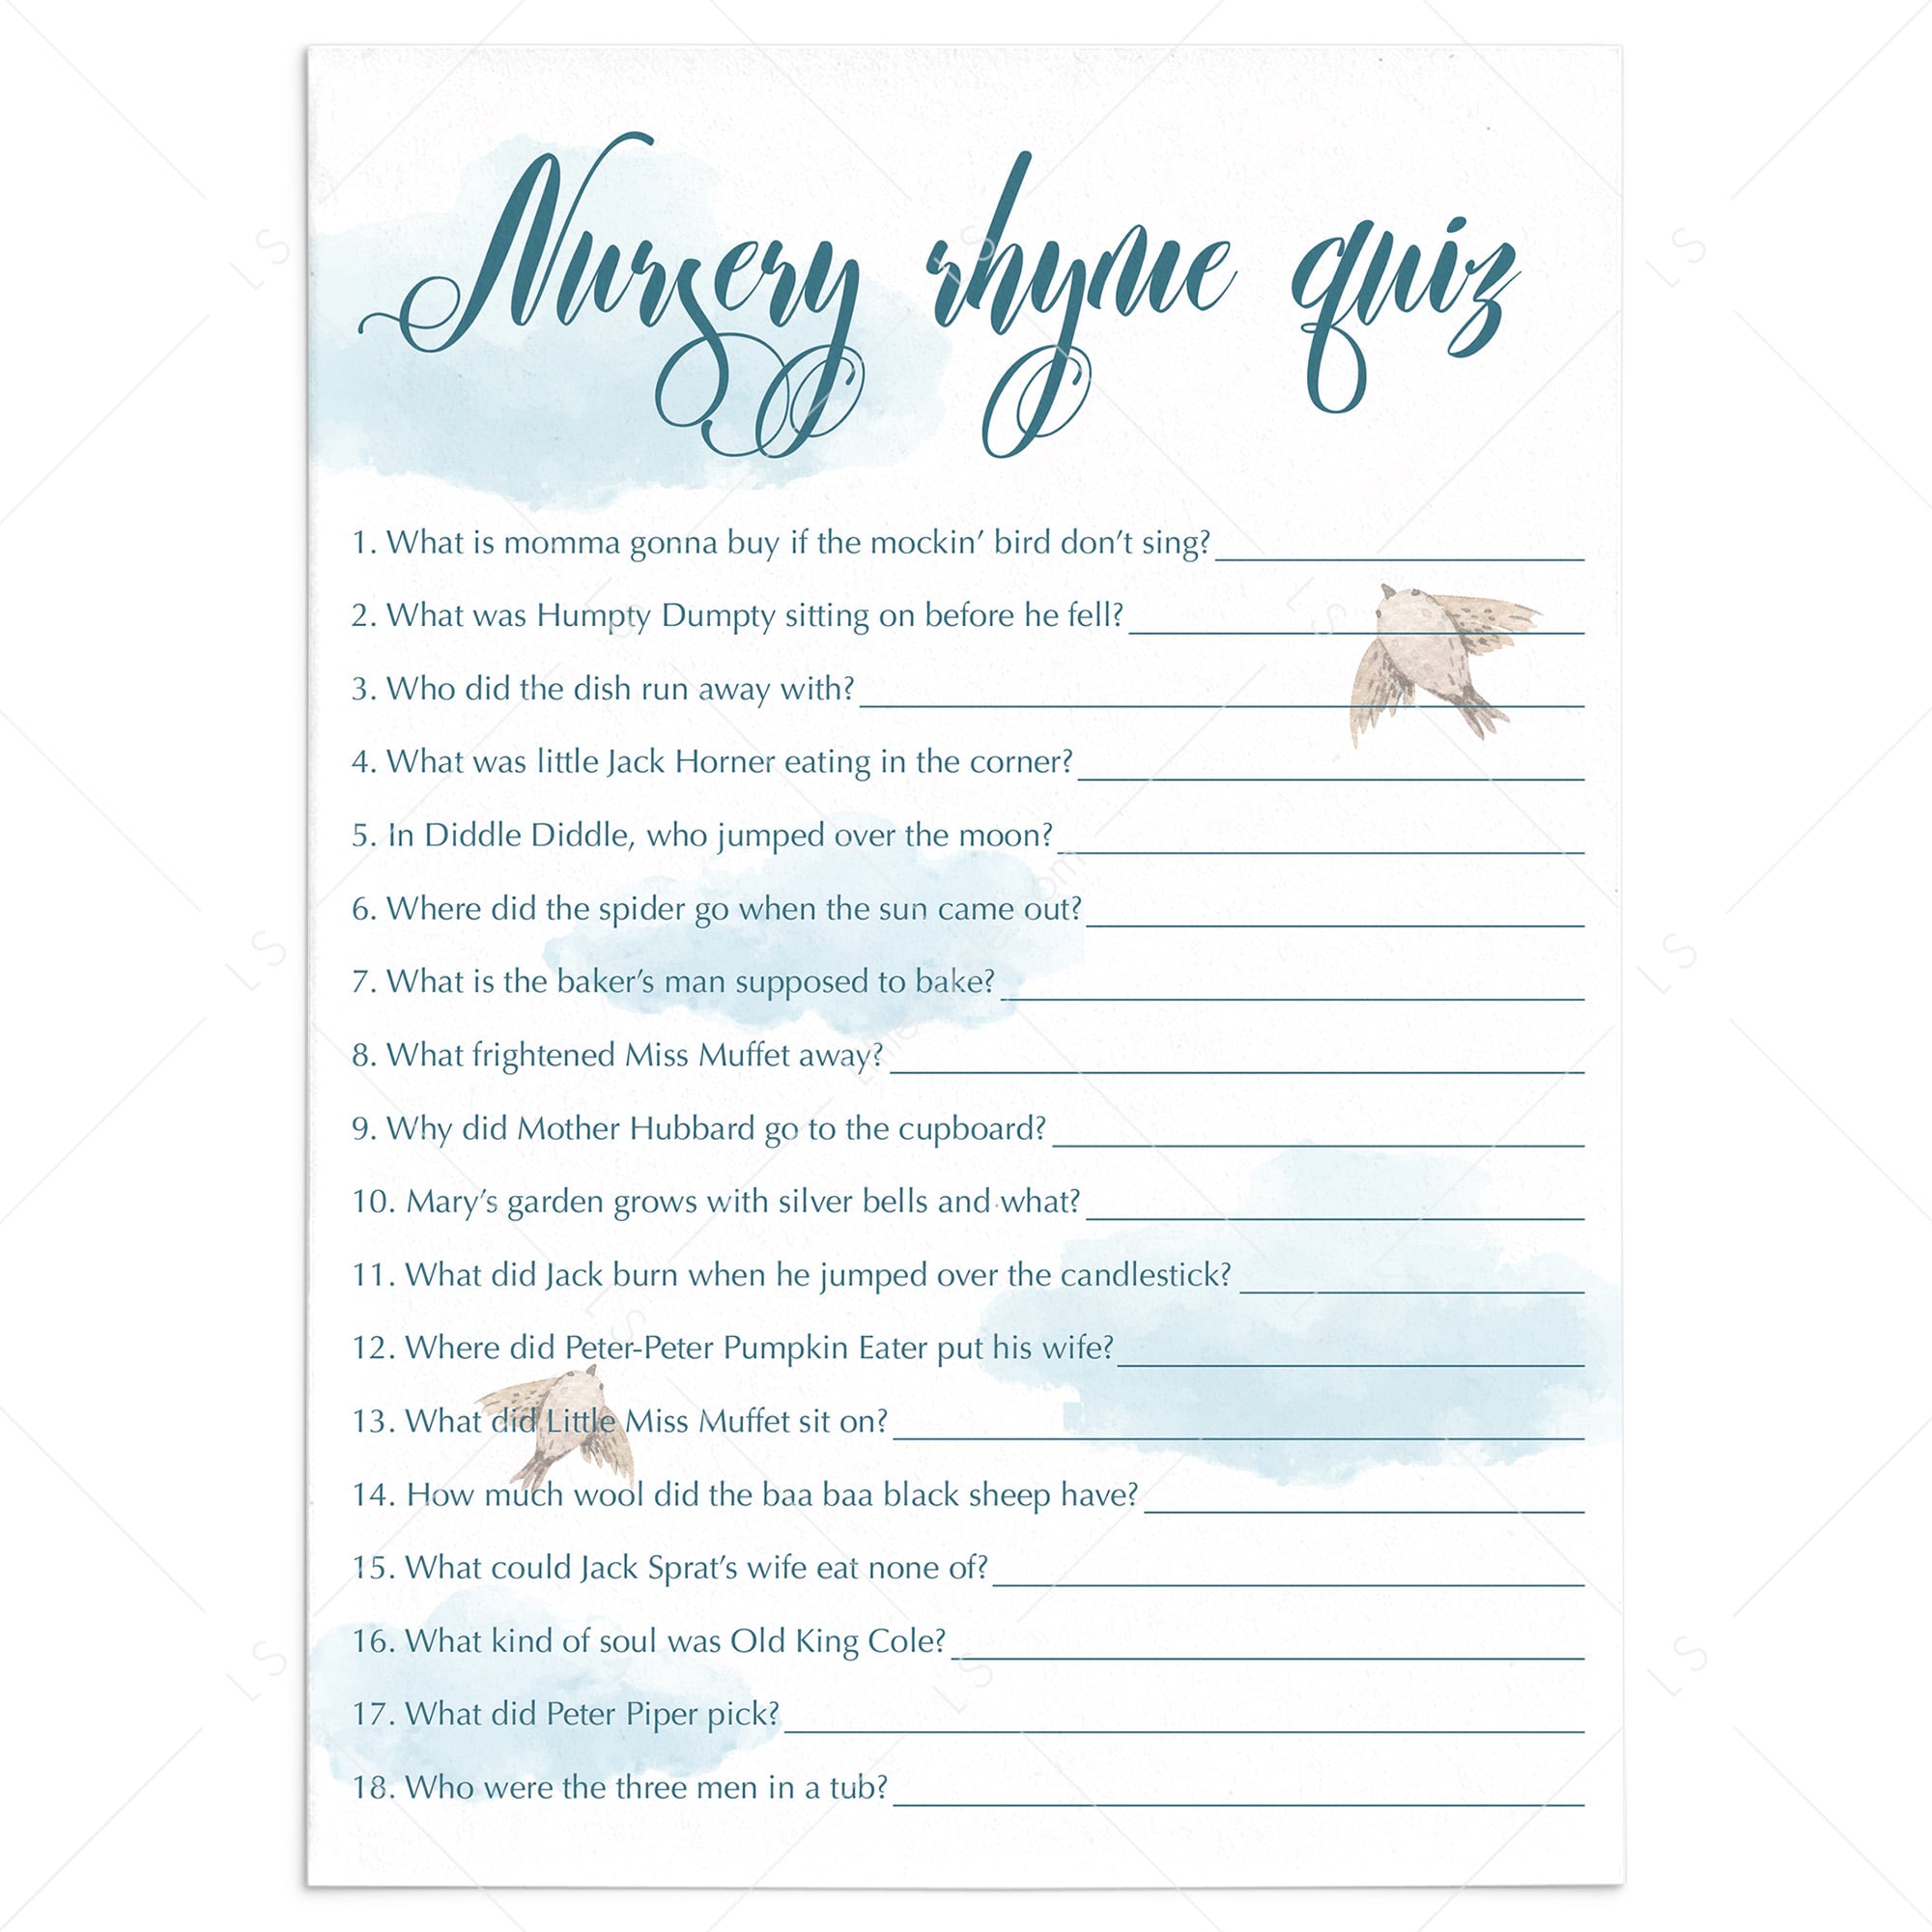 Blue clouds baby party nursery rhyme quiz printable by LittleSizzle